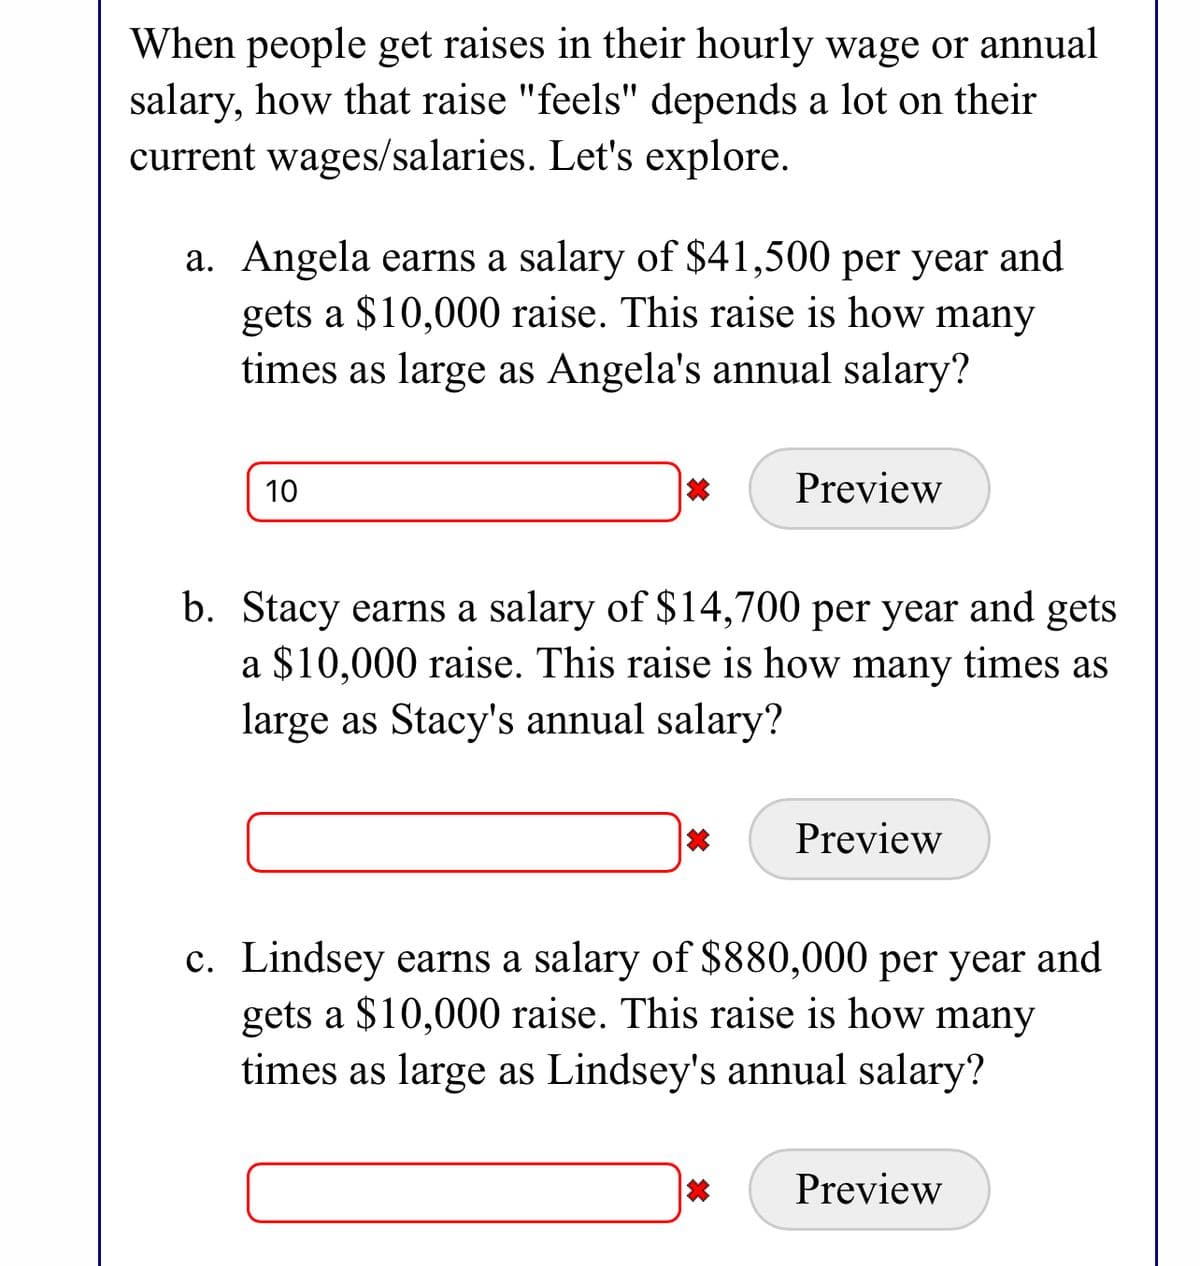 When people get raises in their hourly wage or annual
salary, how that raise "feels" depends a lot on their
current wages/salaries. Let's explore.
a. Angela earns a salary of $41,500 per year and
gets a $10,000 raise. This raise is how many
times as large as Angela's annual salary?
10
Preview
b. Stacy earns a salary of $14,700 per year and gets
a $10,000 raise. This raise is how many times as
large as Stacy's annual salary?
Preview
c. Lindsey earns a salary of $880,000 per year and
gets a $10,000 raise. This raise is how many
times as large as Lindsey's annual salary?
Preview
